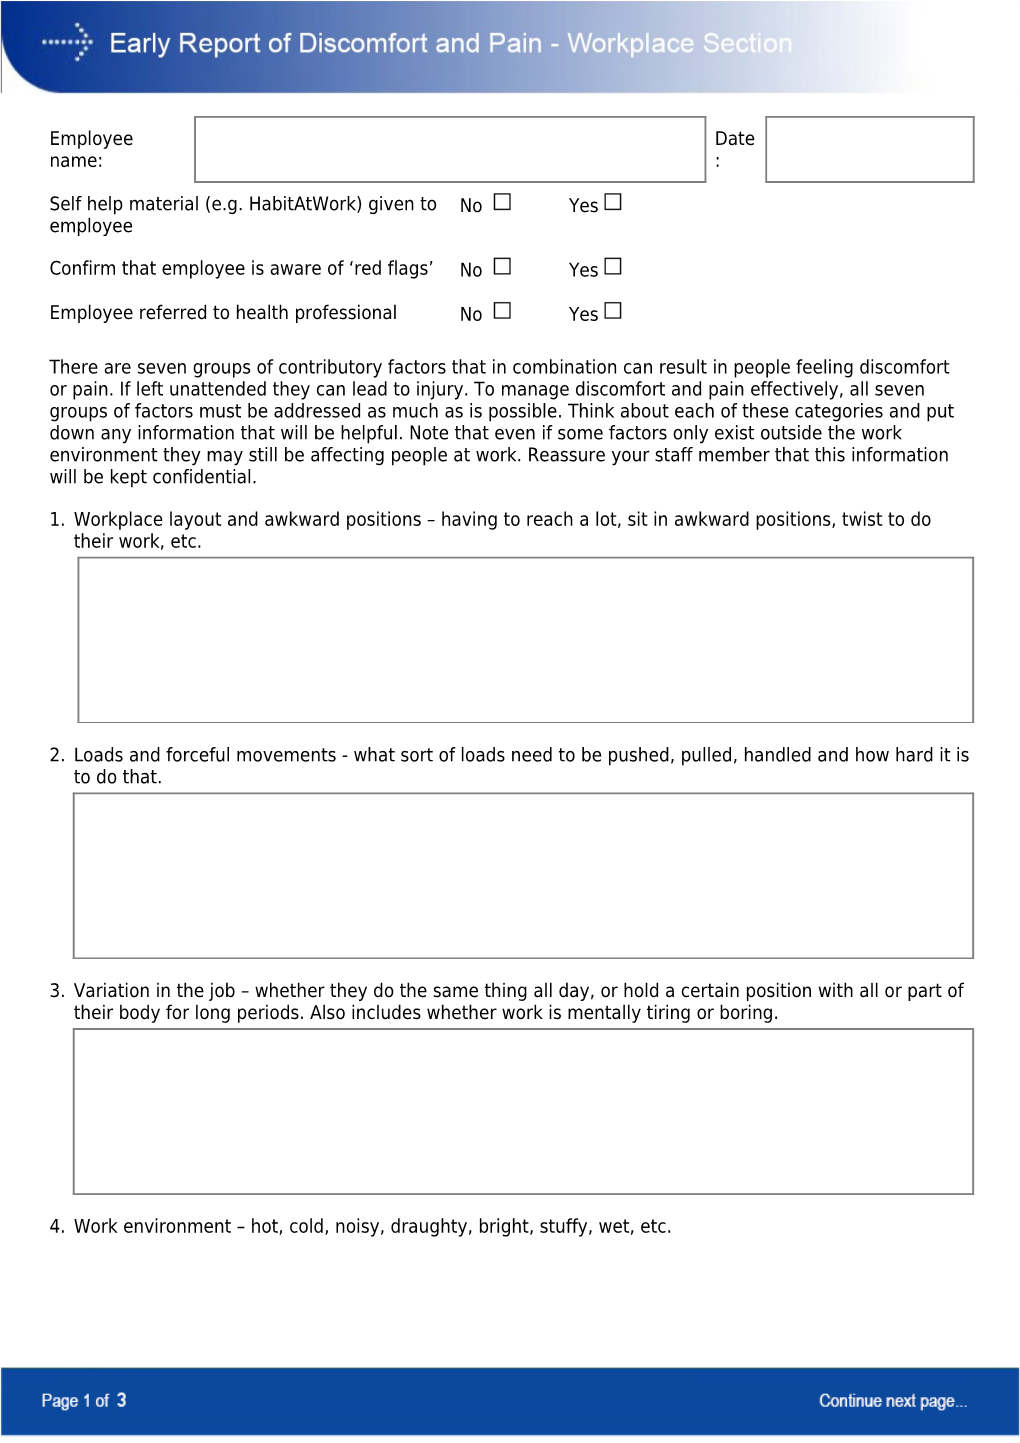 Please Fill out This Form and Hand It to Your Supervisor/Manager